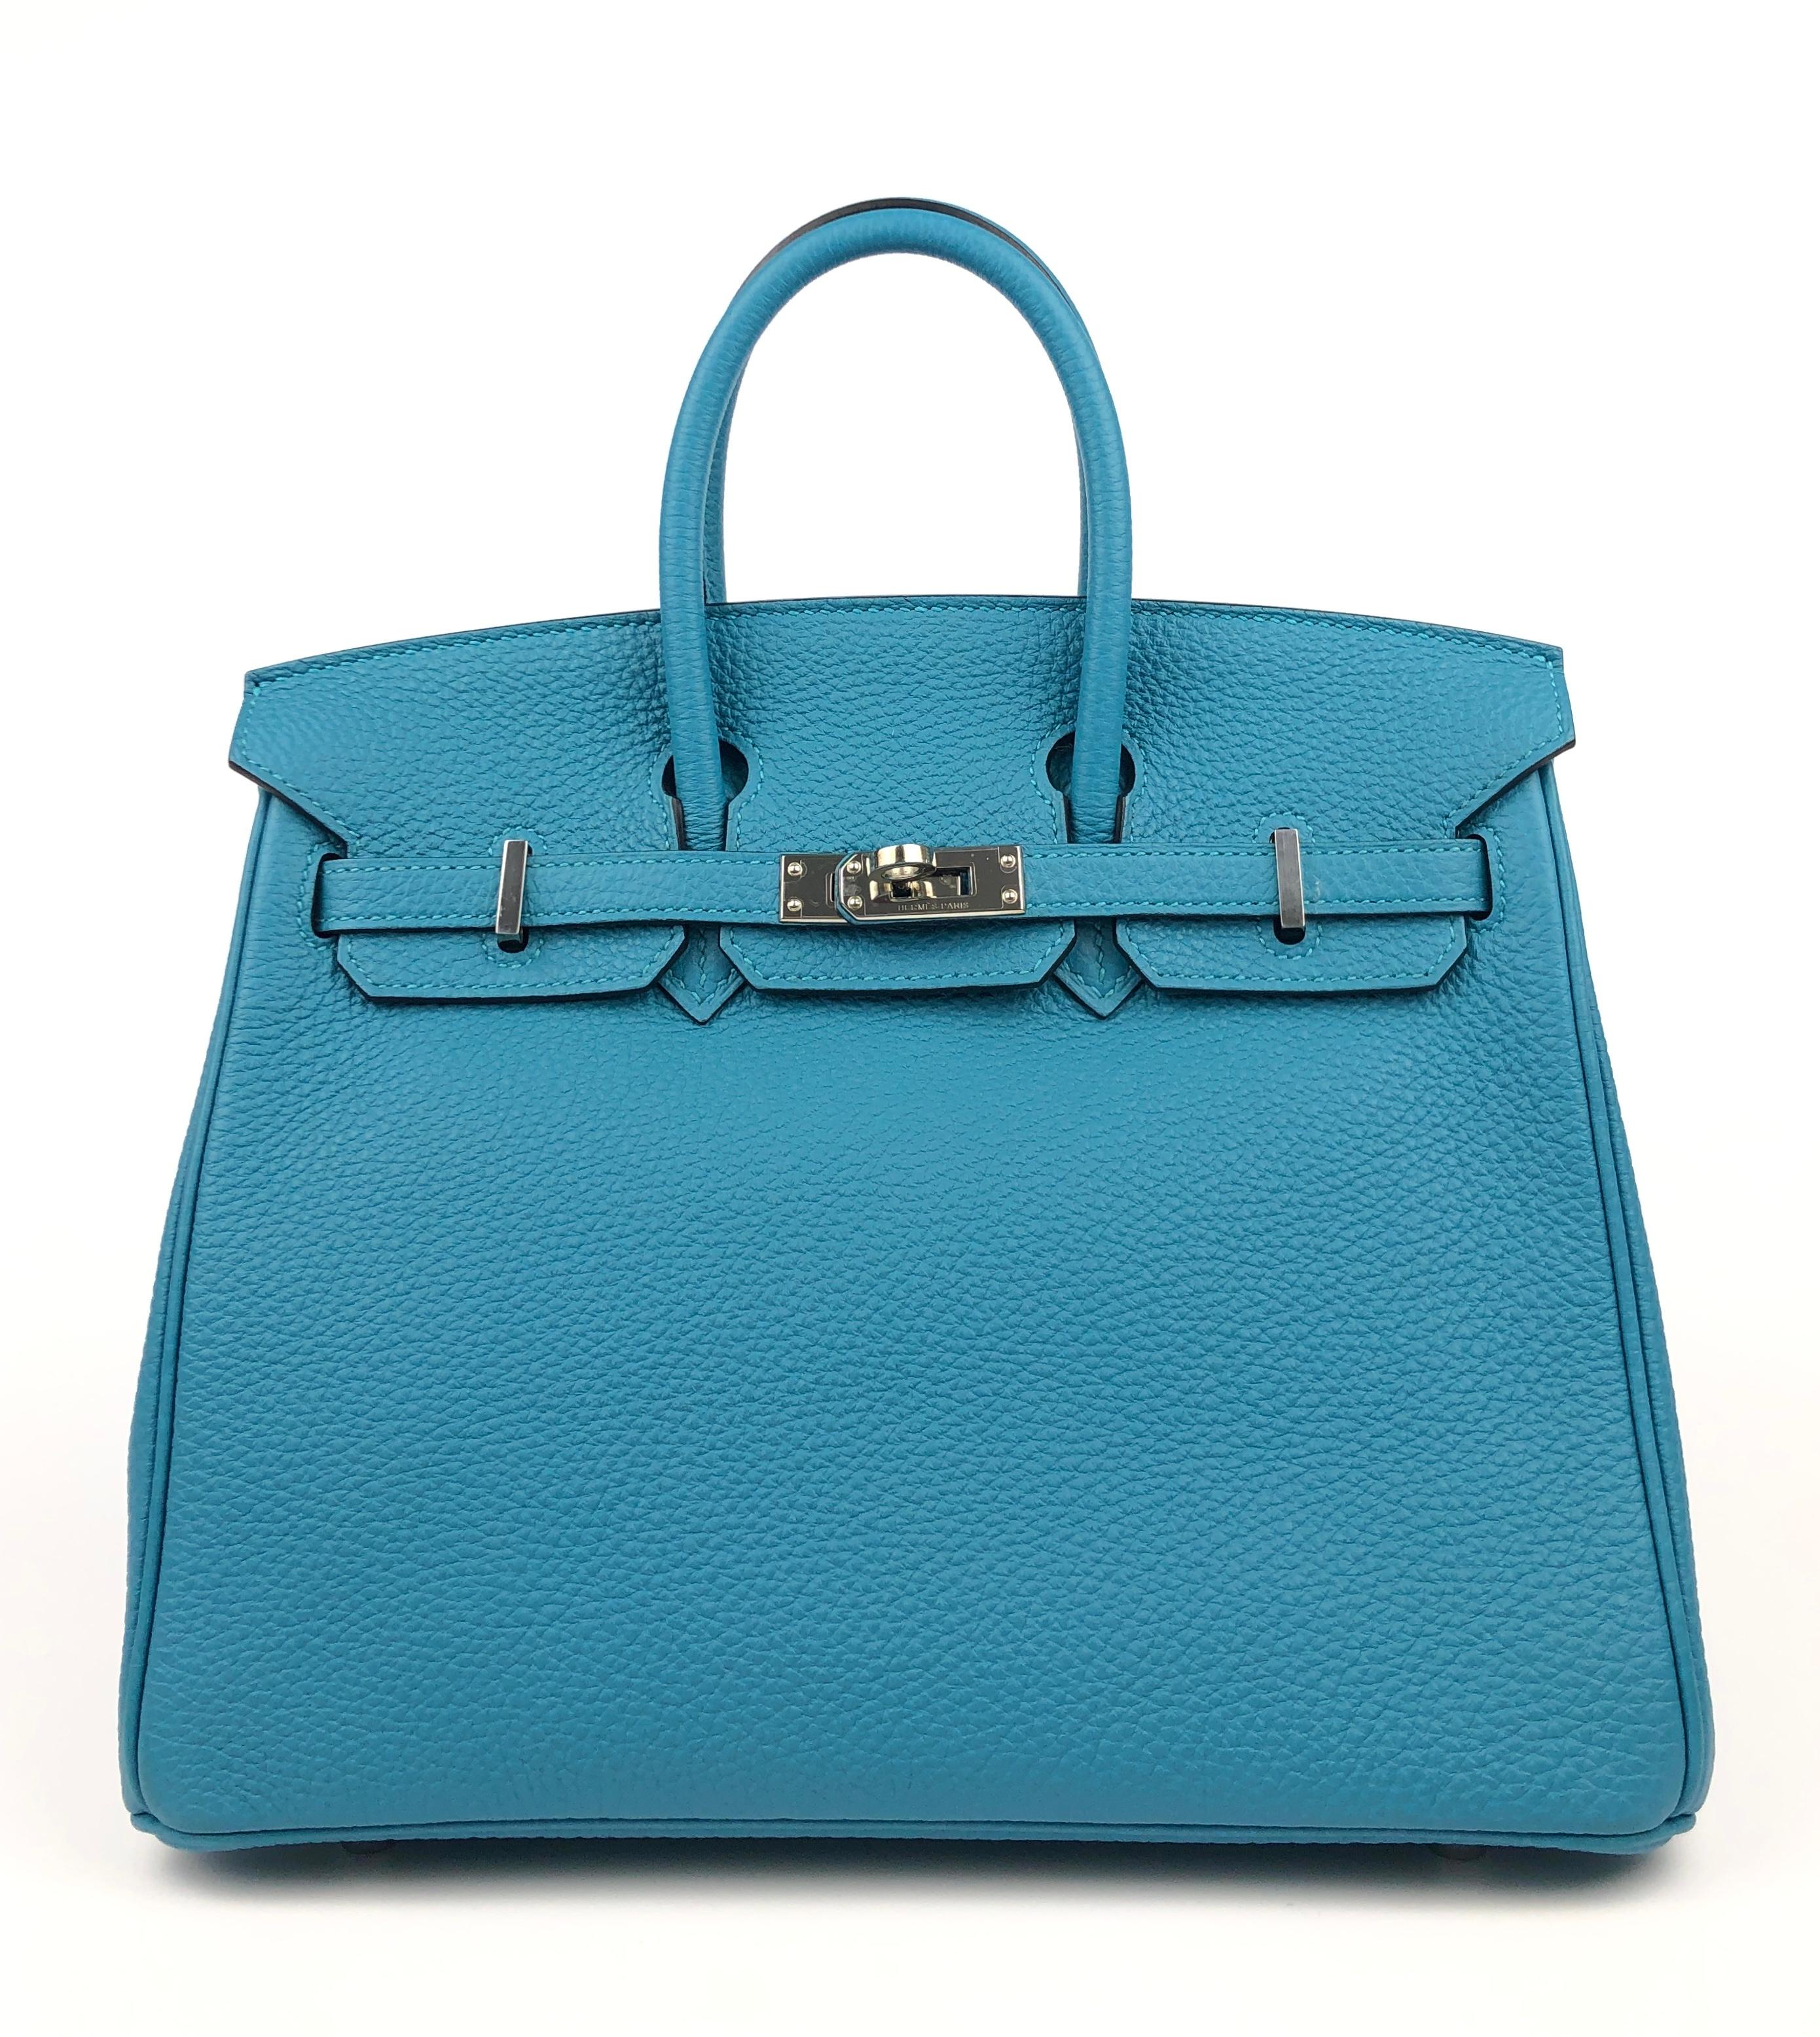 Hermes Birkin 25 Turquoise Blue Togo Leather Palladium Hardware. Pristine Condition with Plastic on Hardware, perfect corners and structure. 

Shop with Confidence from Lux Addicts. Authenticity Guaranteed!